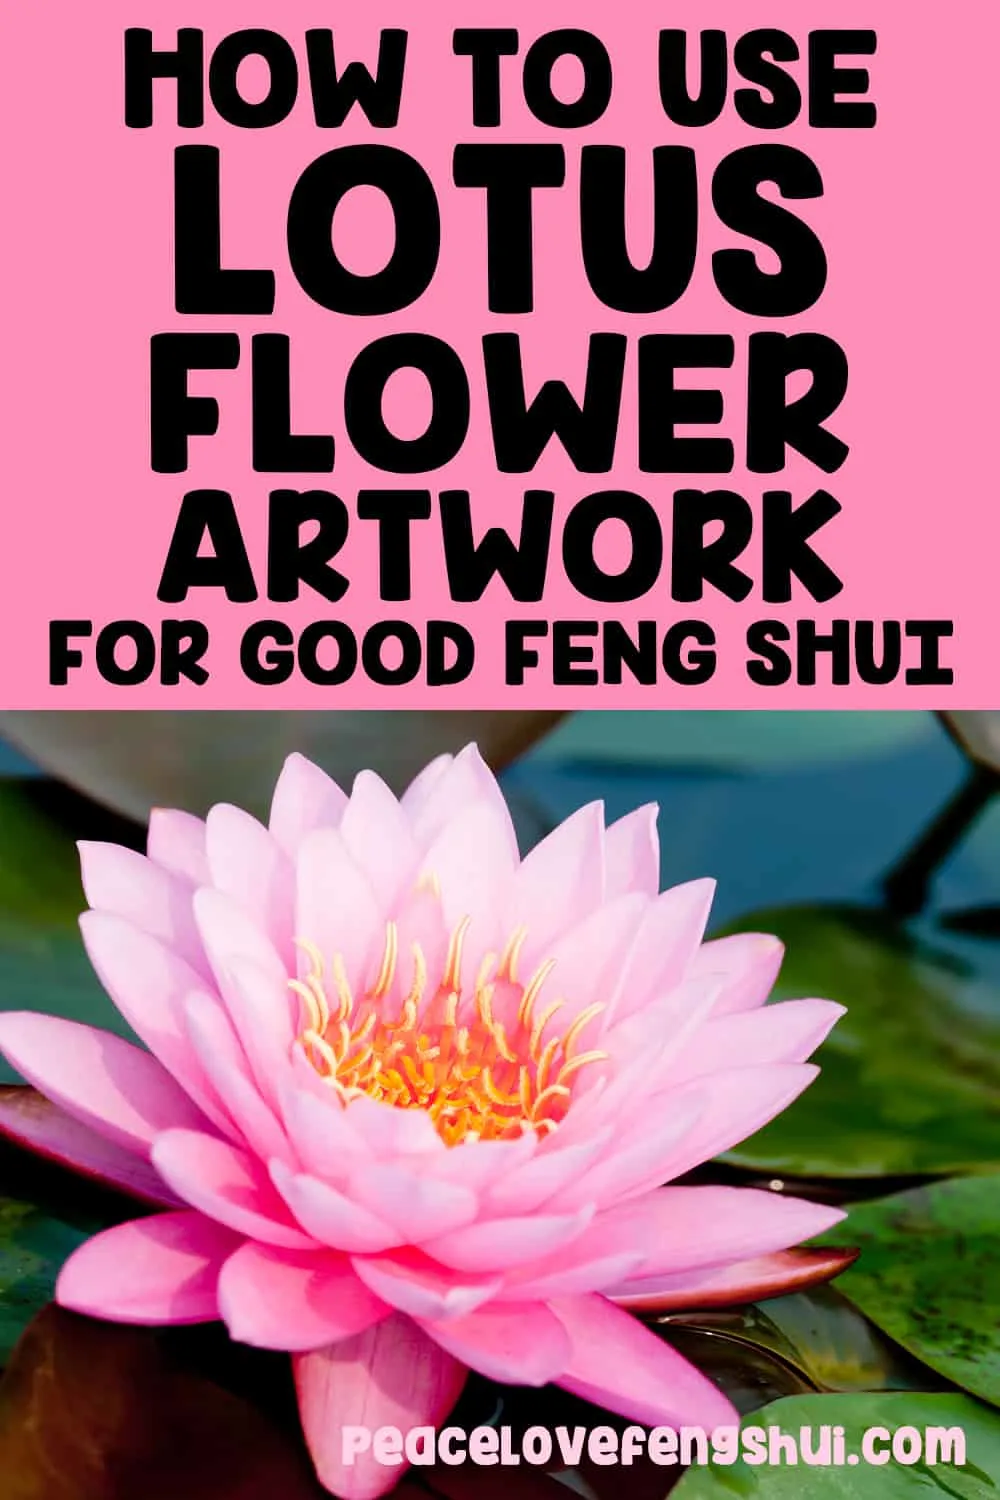 how to use lotus flower artwork for good feng shui